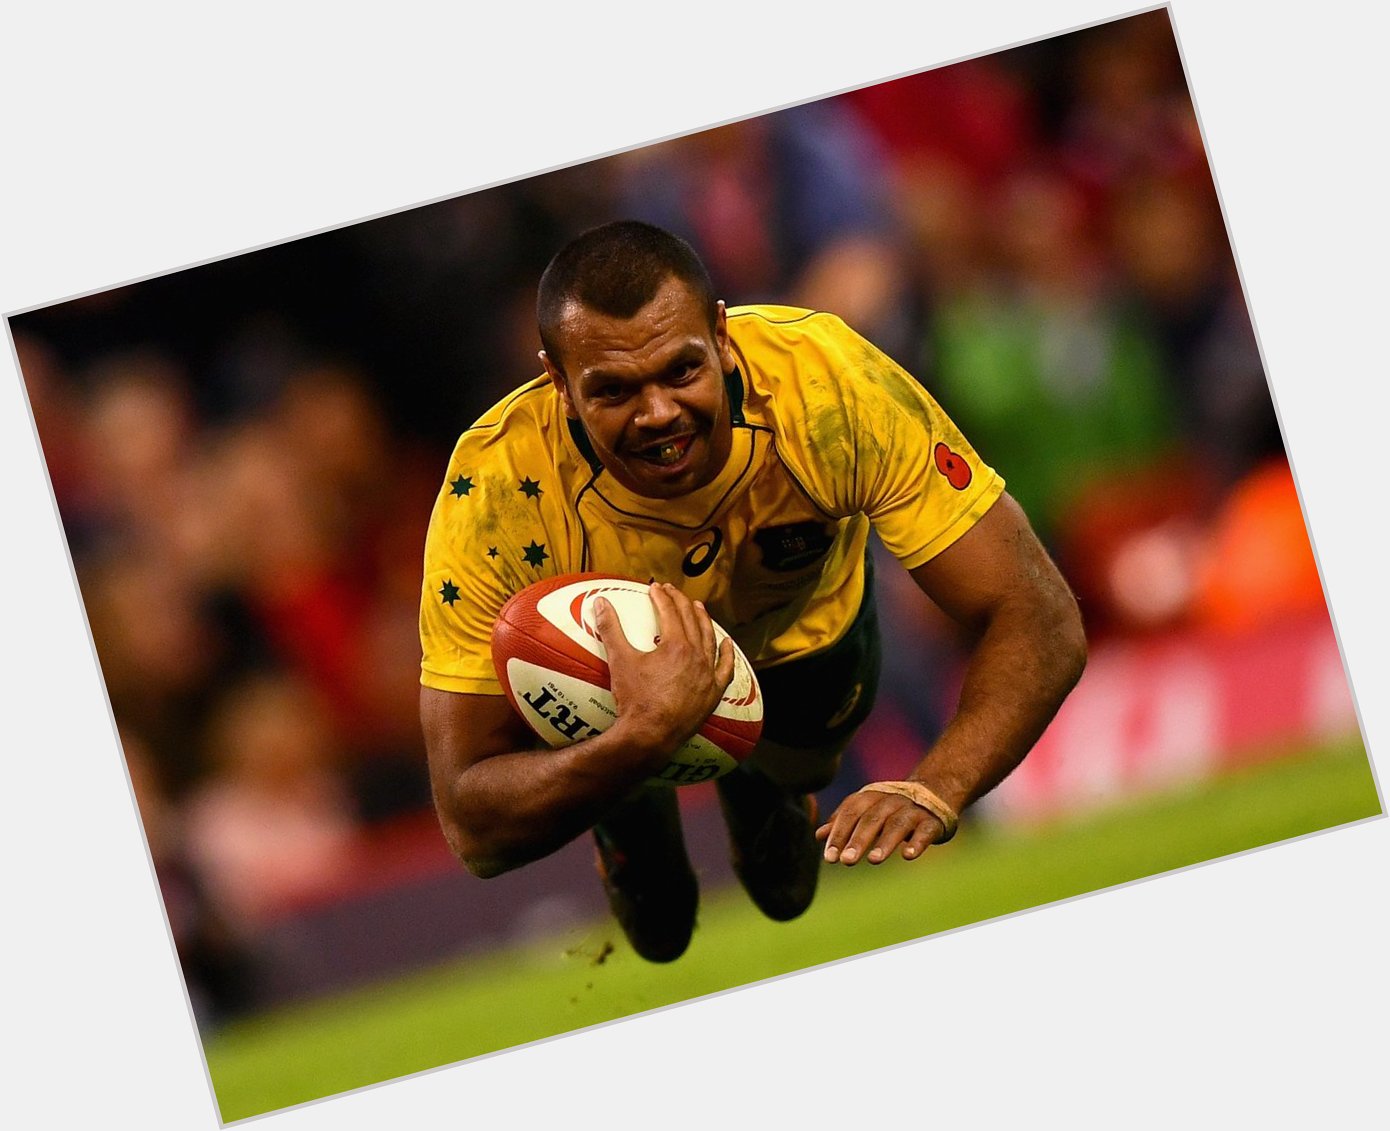 Happy birthday to Wallabies & Waratahs star who is 29 today - have an awesome day, KB! 